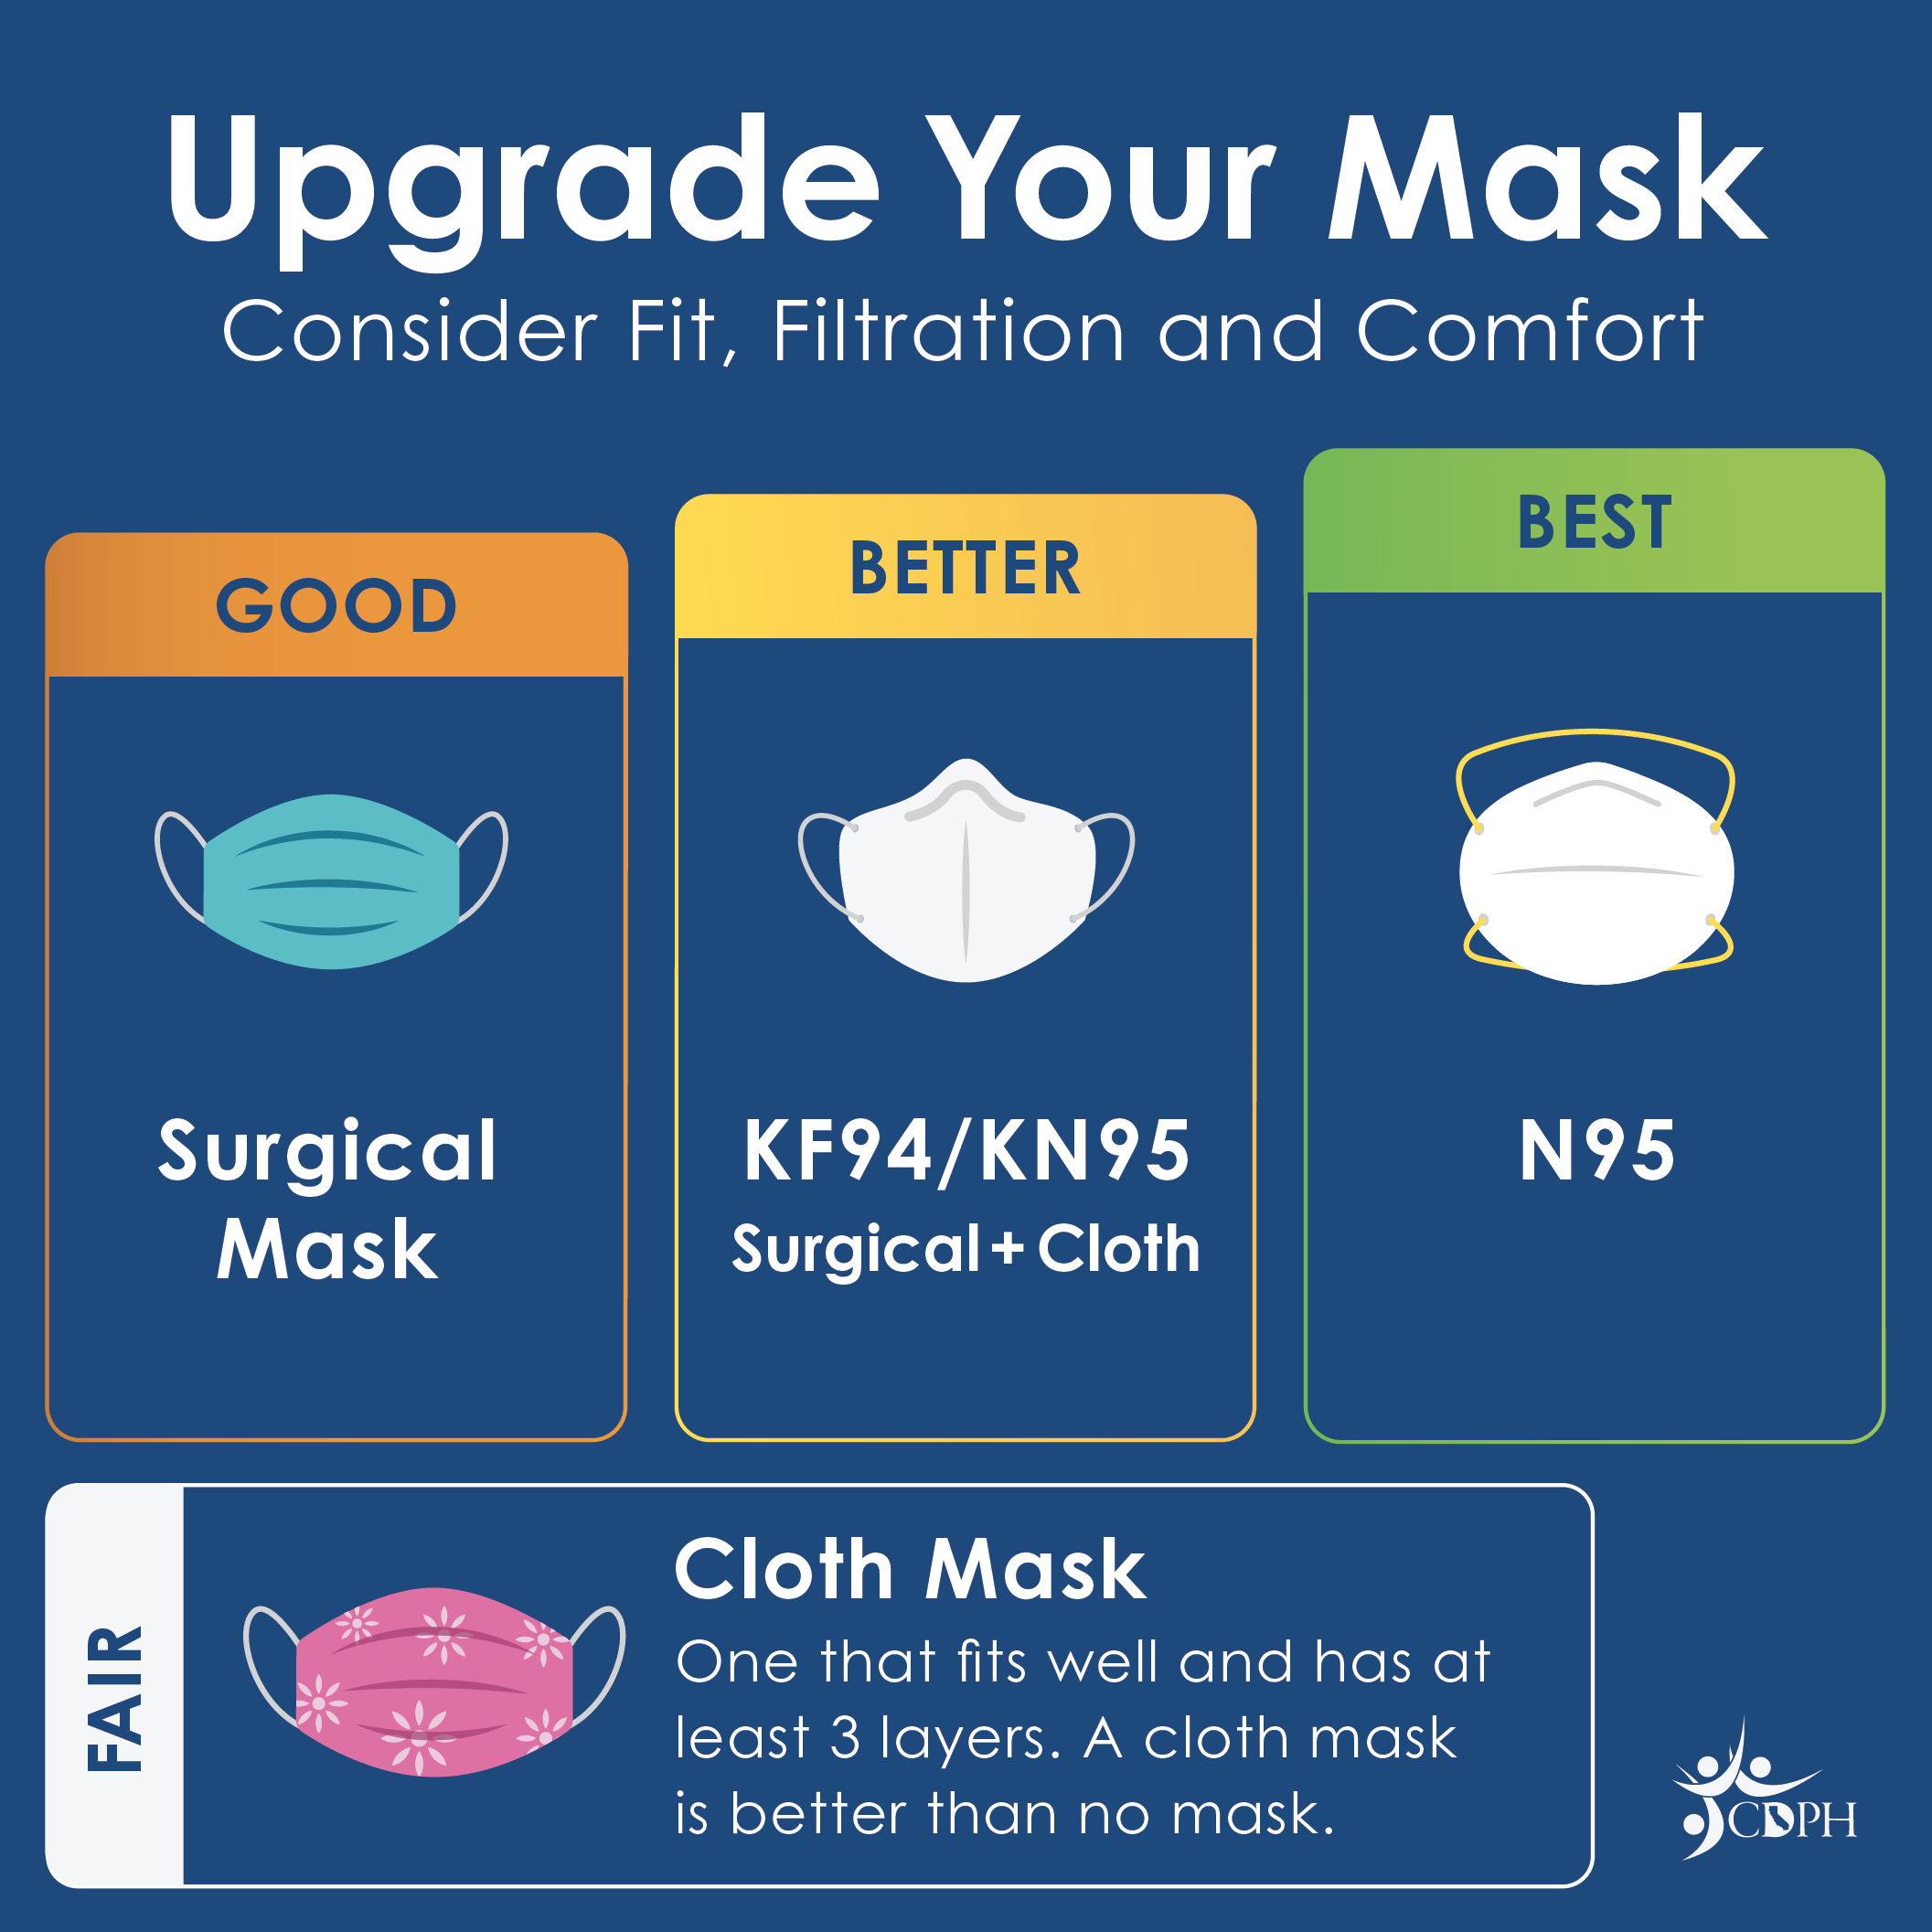 Upgrade your mask